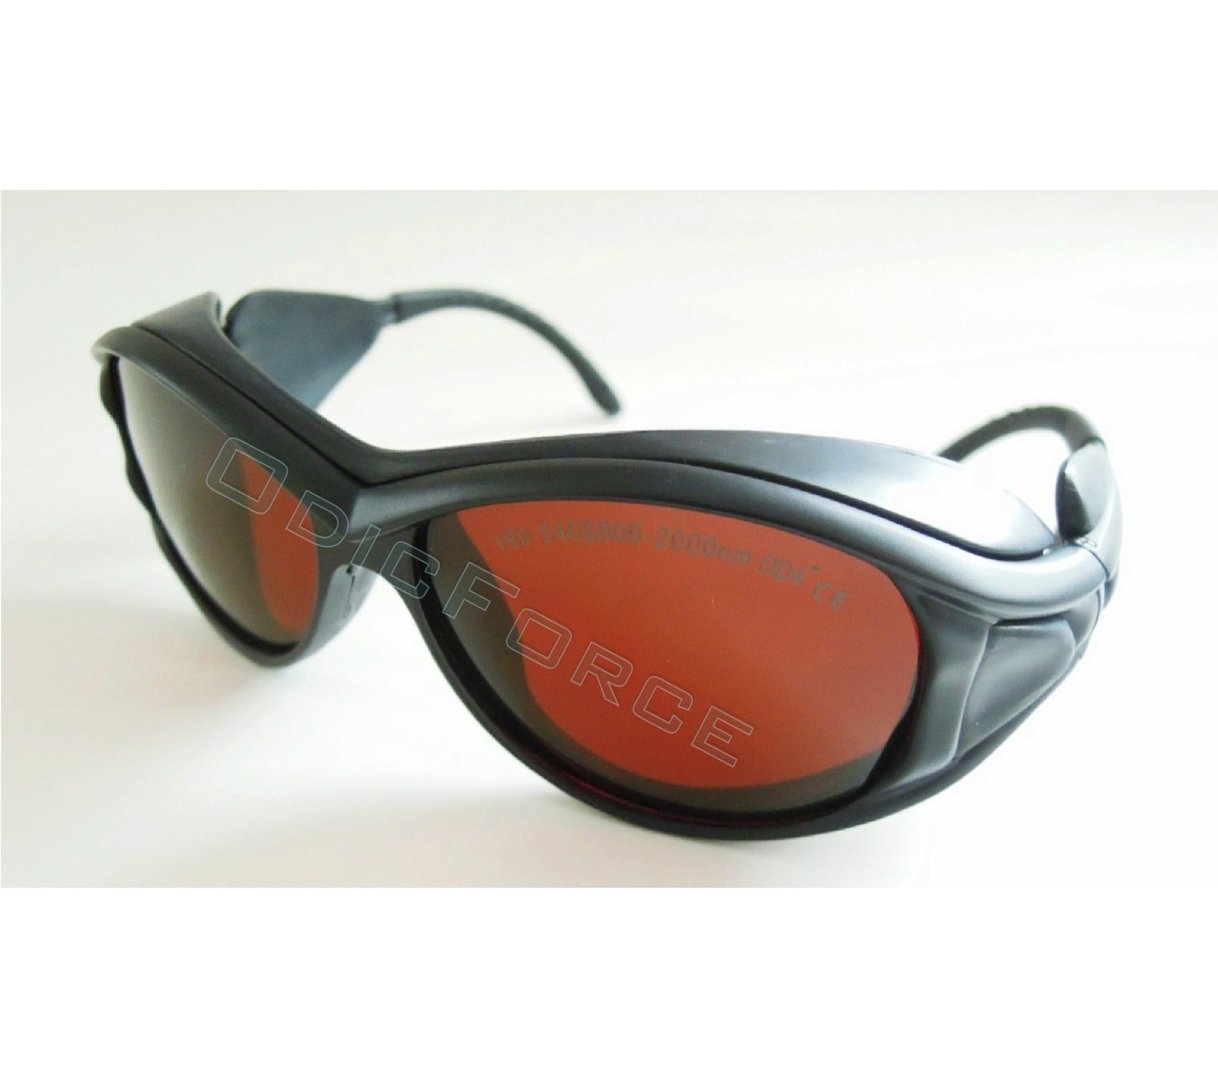 EP-1 190nm-540nm 800nm-2000nm Laser Protective Goggles Safety Glasses OD4 CE 